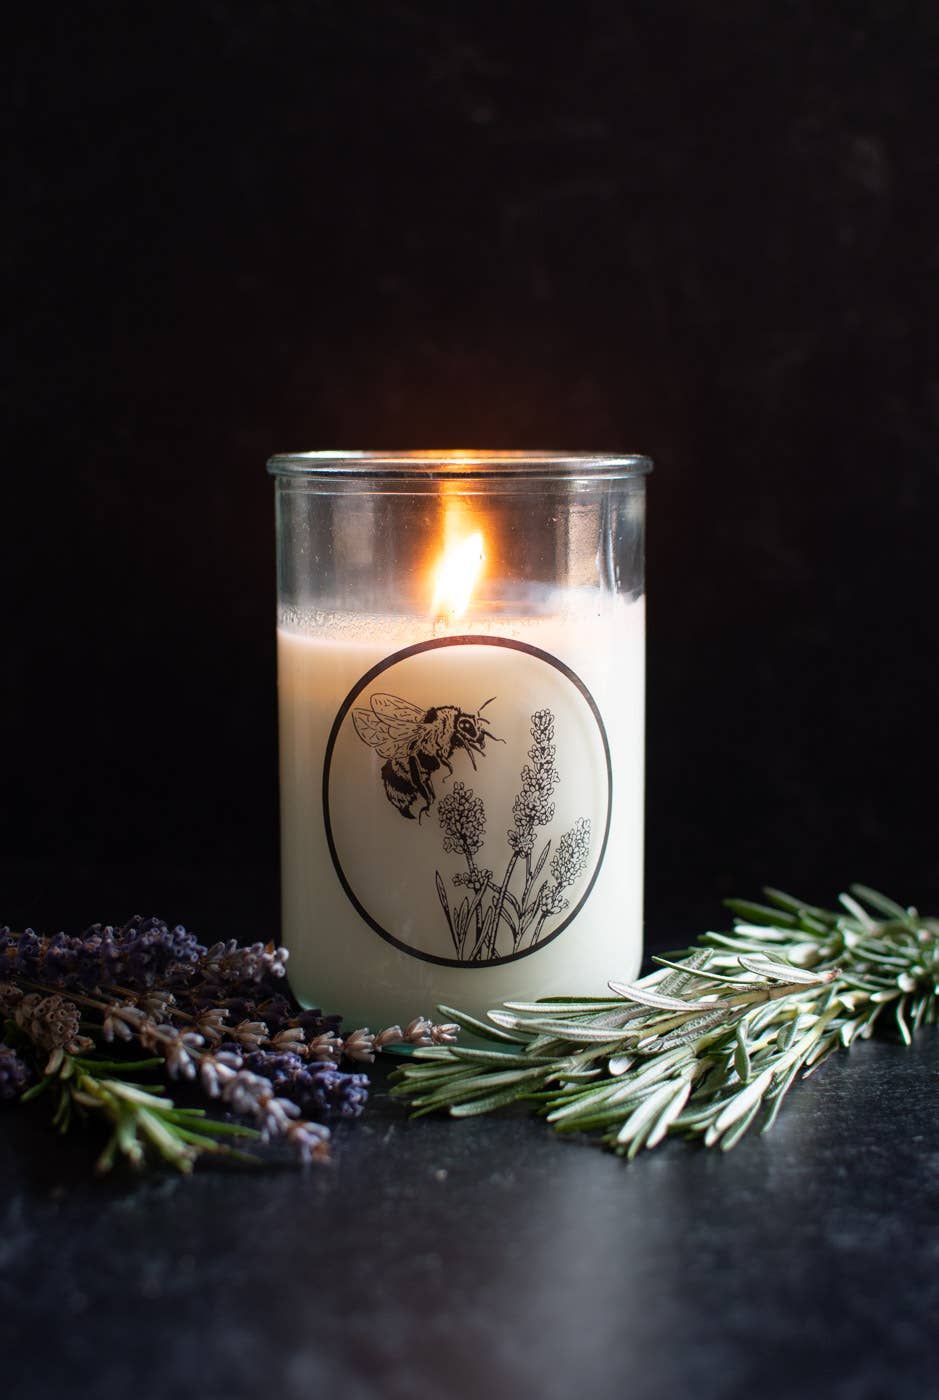 Sea witch botanicals- Herbal Renewal candle (ROTB)